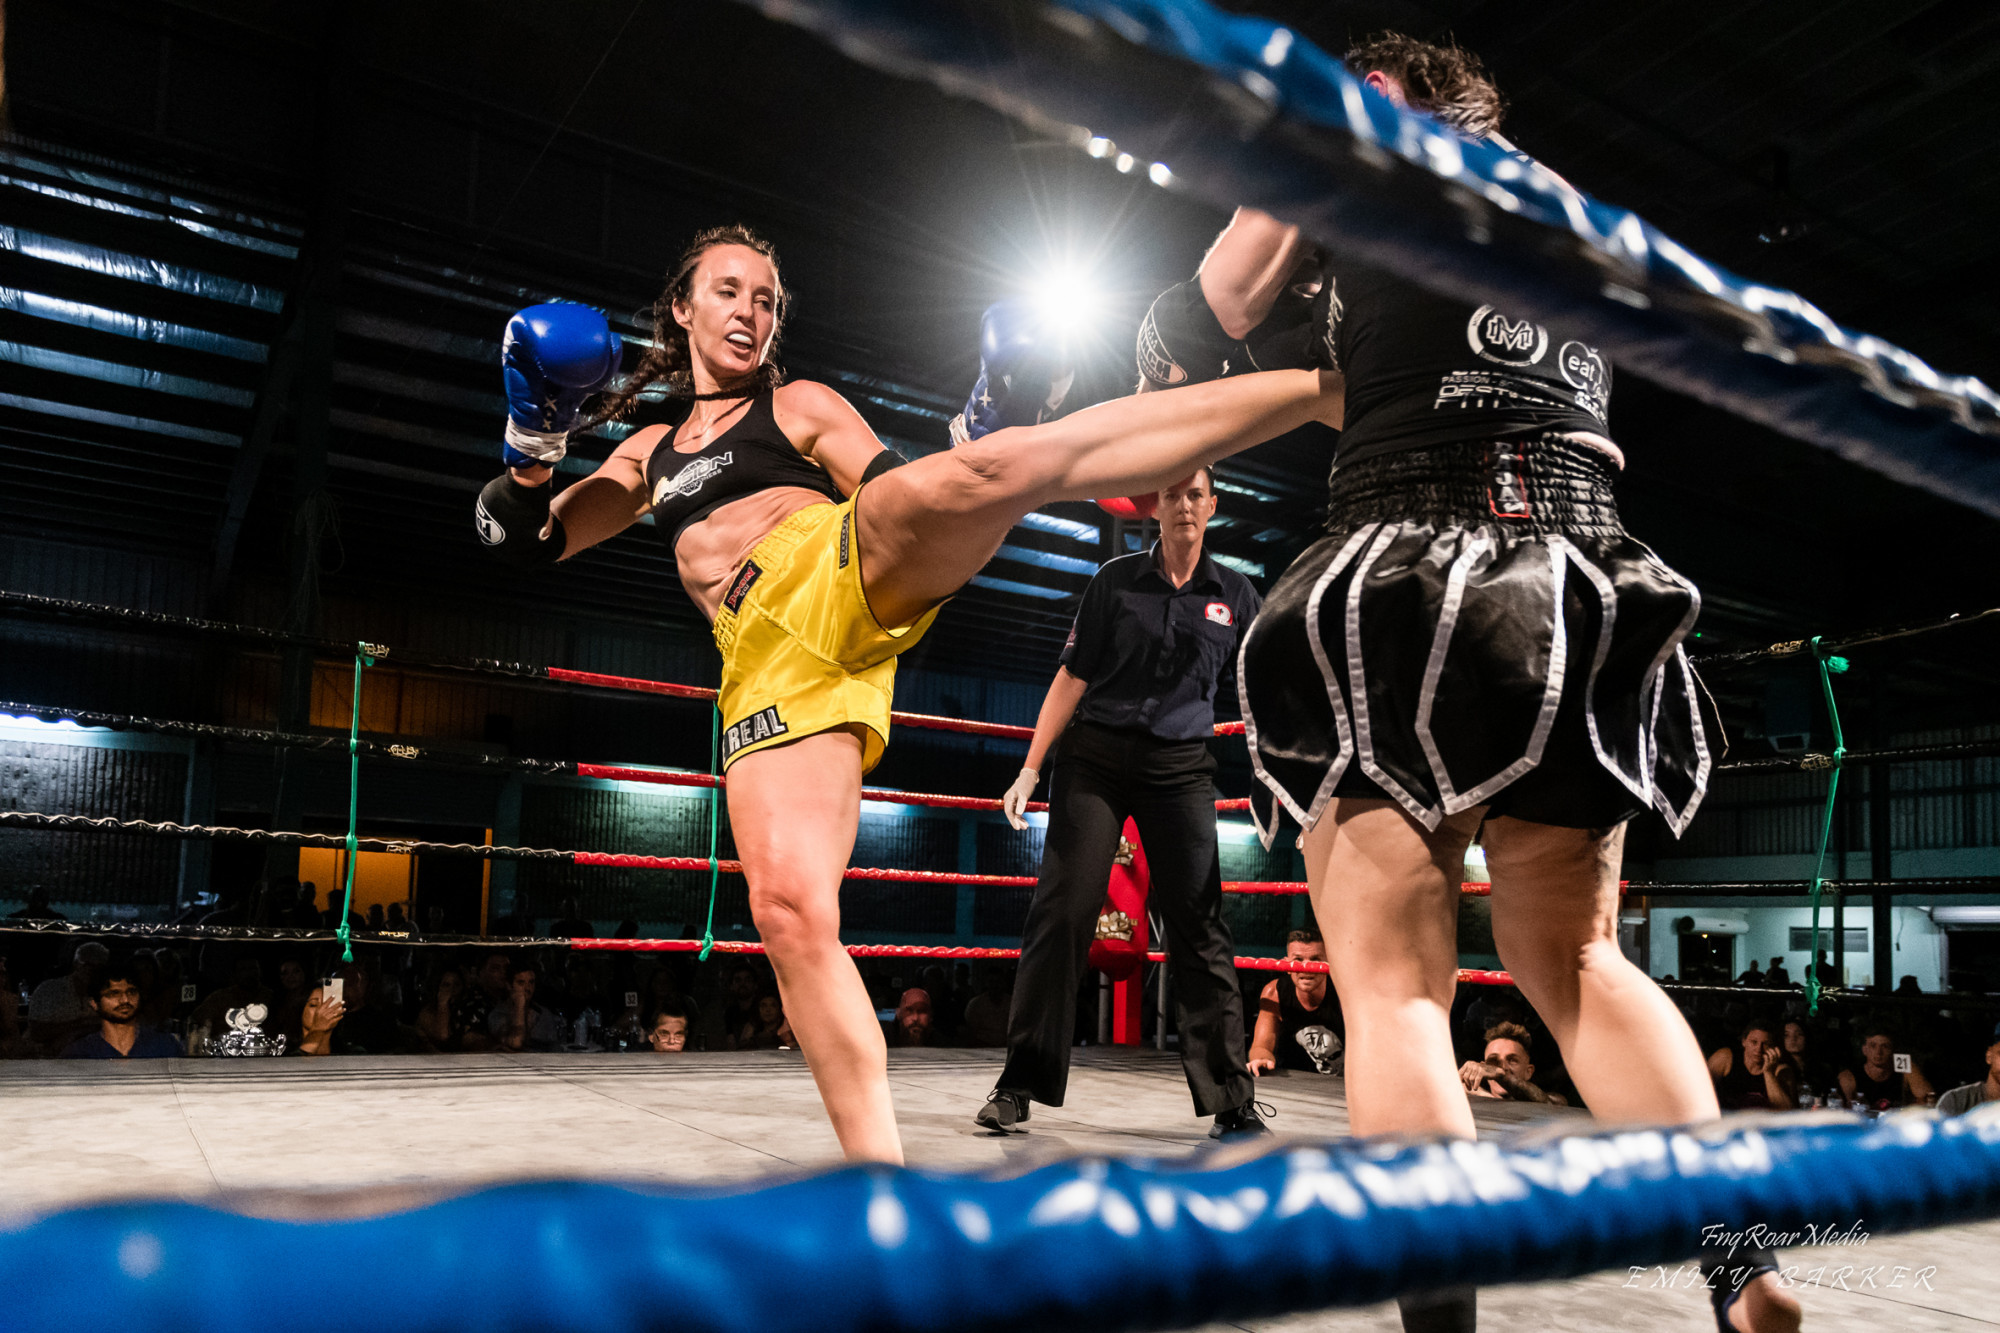 Jessica Geyl of Fusion Fight and Fitness Cairns is the only female Muay Thai title holder in North Queensland after winning the Muay Thai Queensland Junior Middleweight Title. Photos by FNQ Roar Media